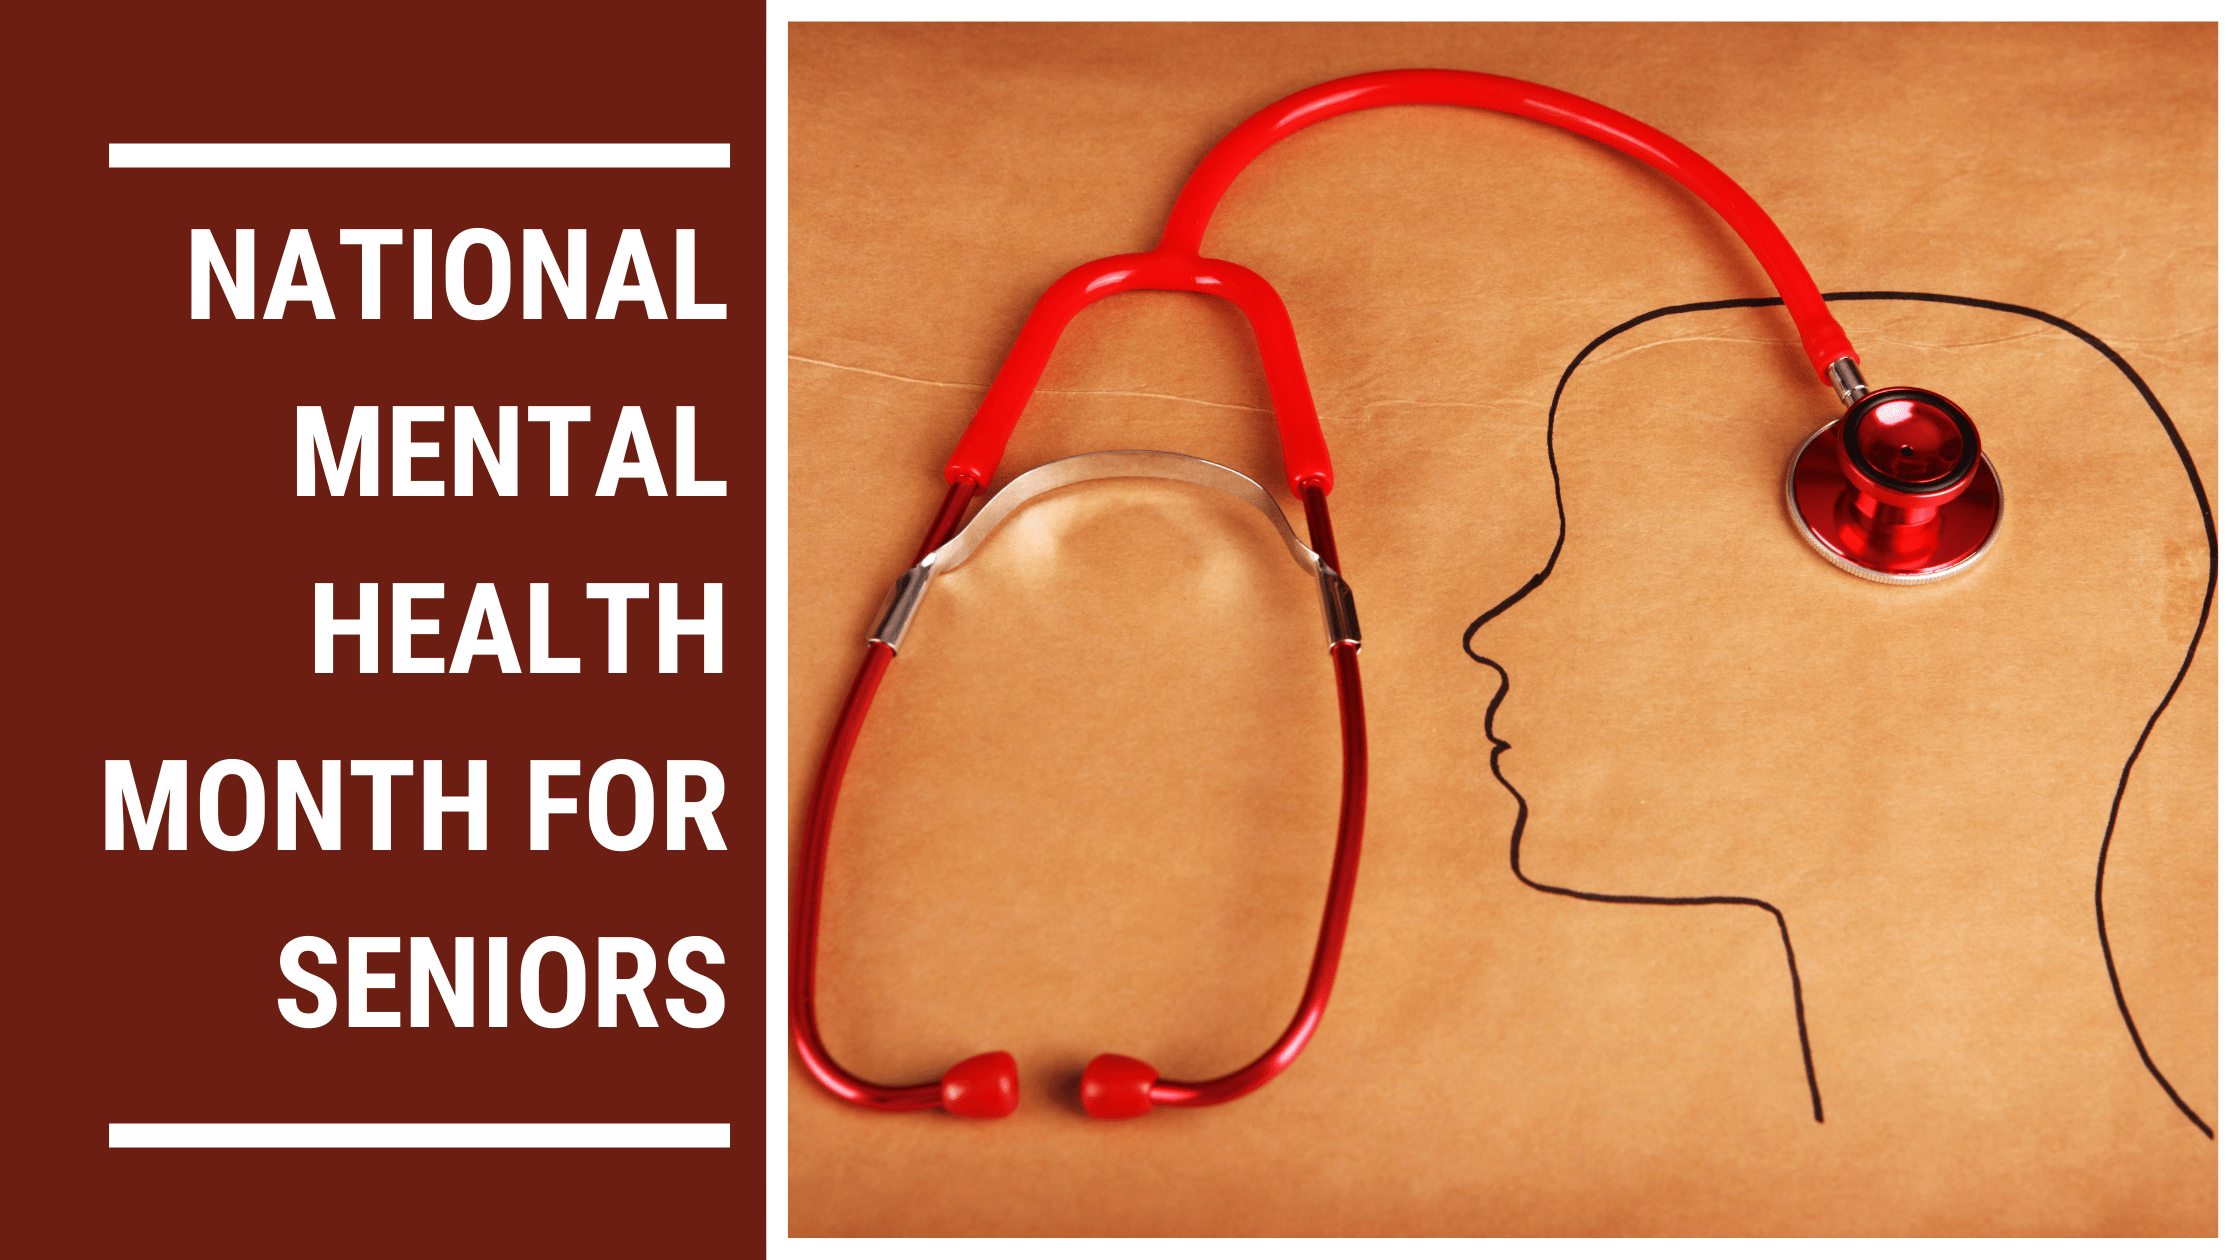 National Mental Health Month For Seniors Featured Image